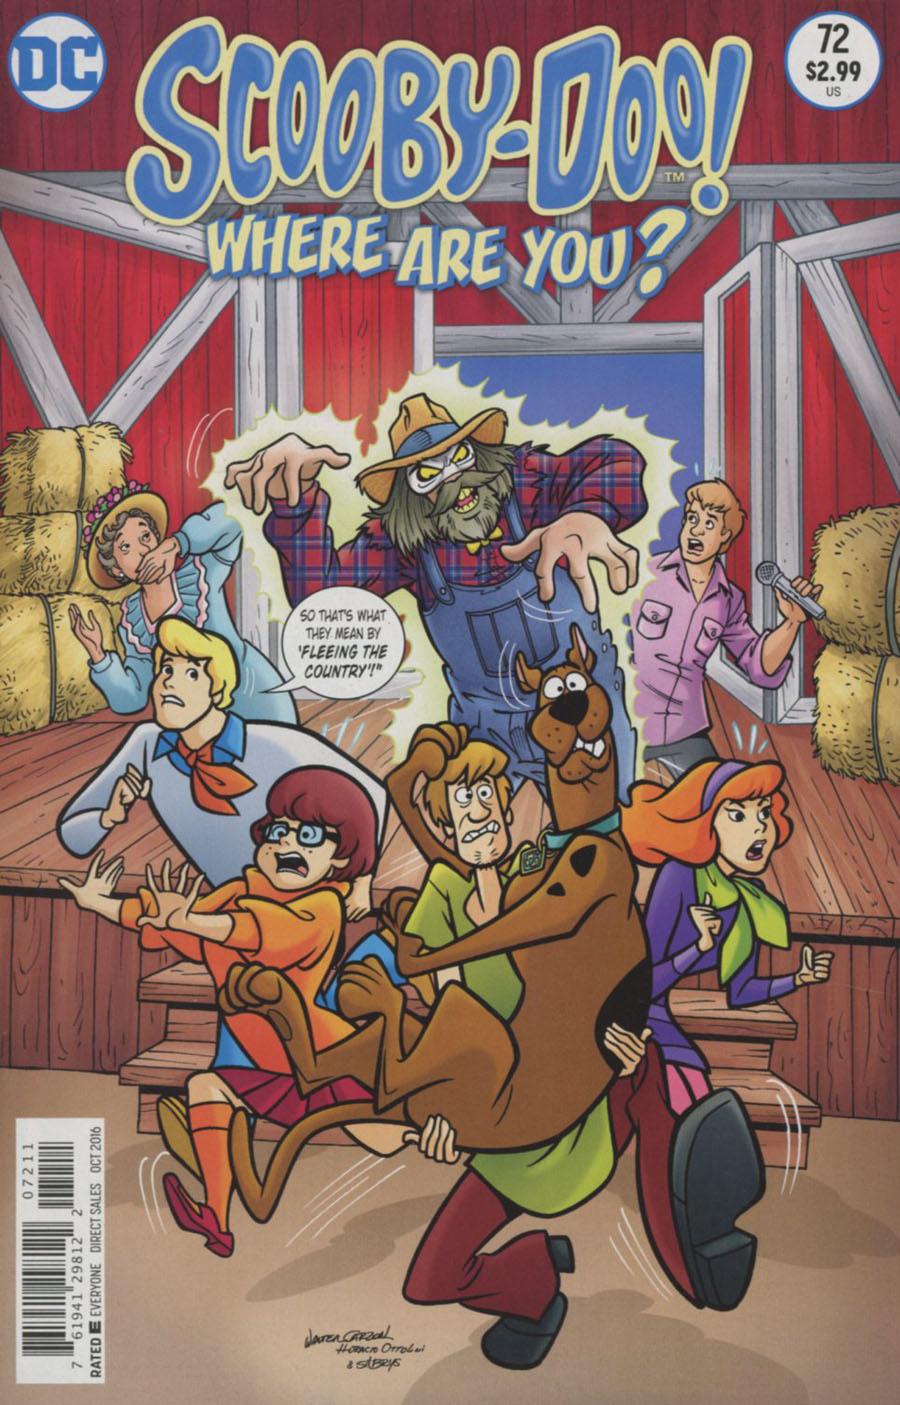 Scooby-Doo Where Are You Vol. 1 #72